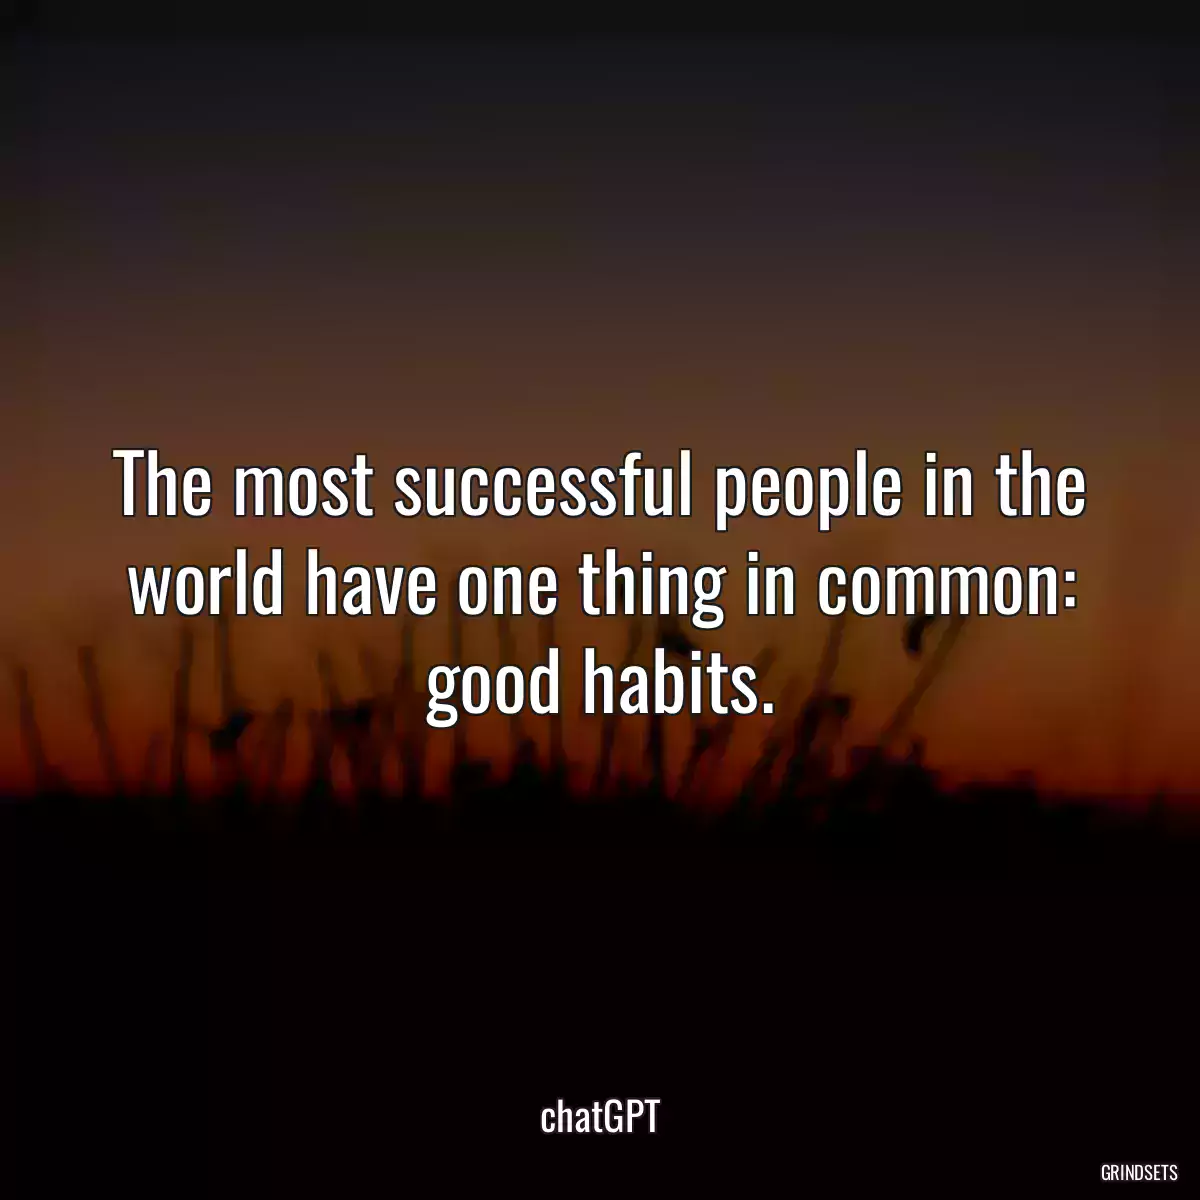 The most successful people in the world have one thing in common: good habits.